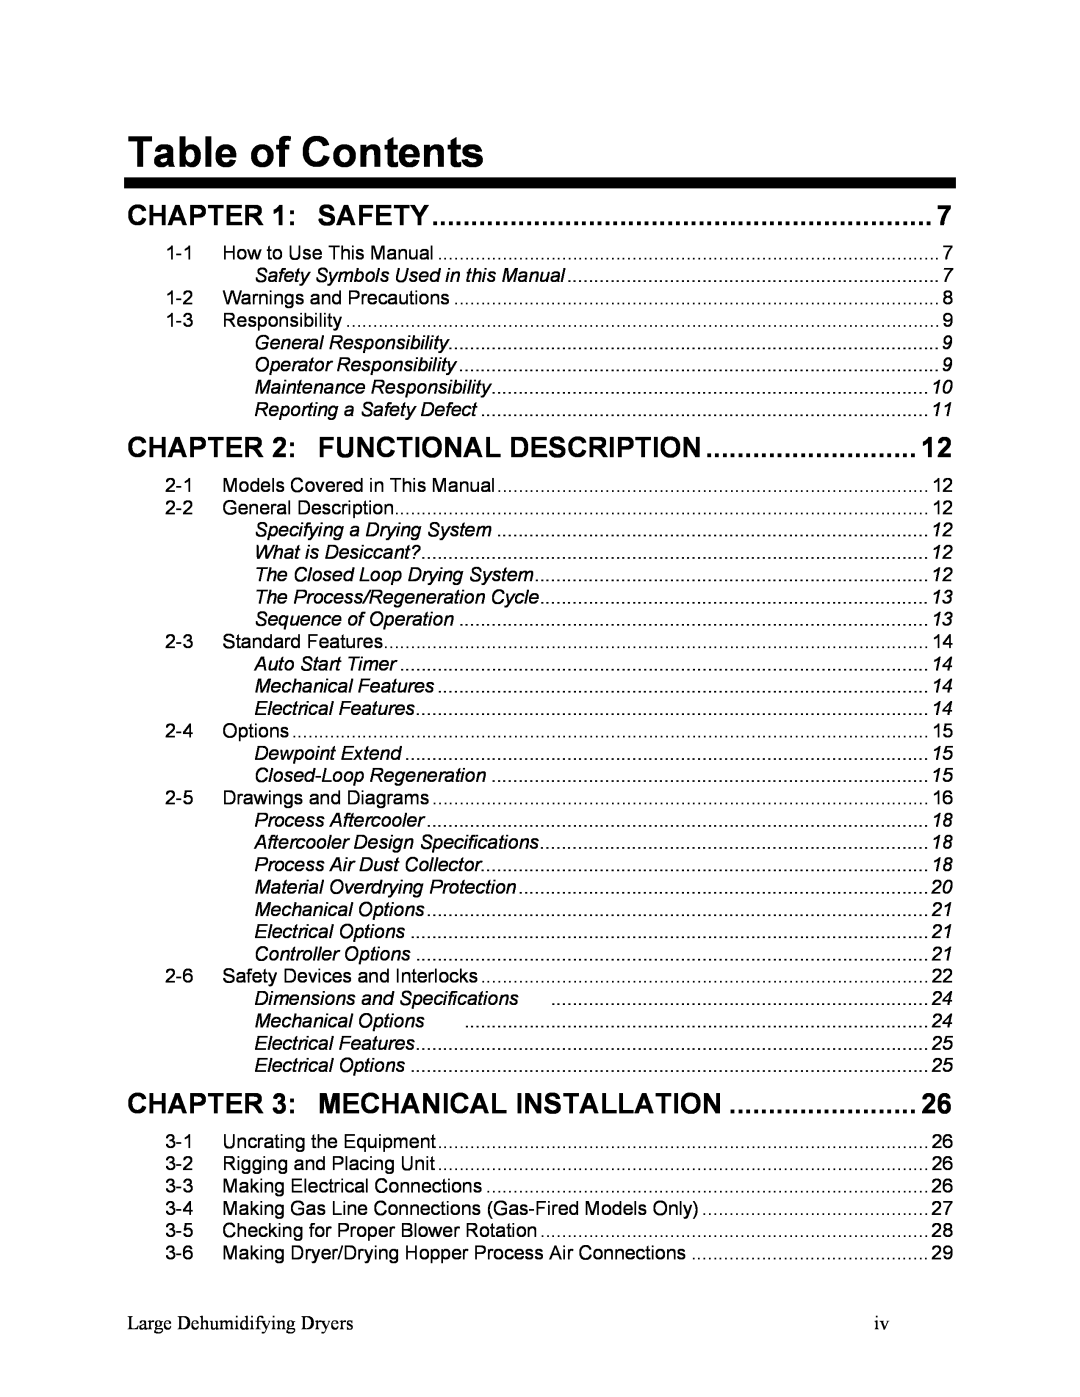 Sterling 882.00295.00 specifications Table of Contents, Safety, Functional Description, Mechanical Installation 